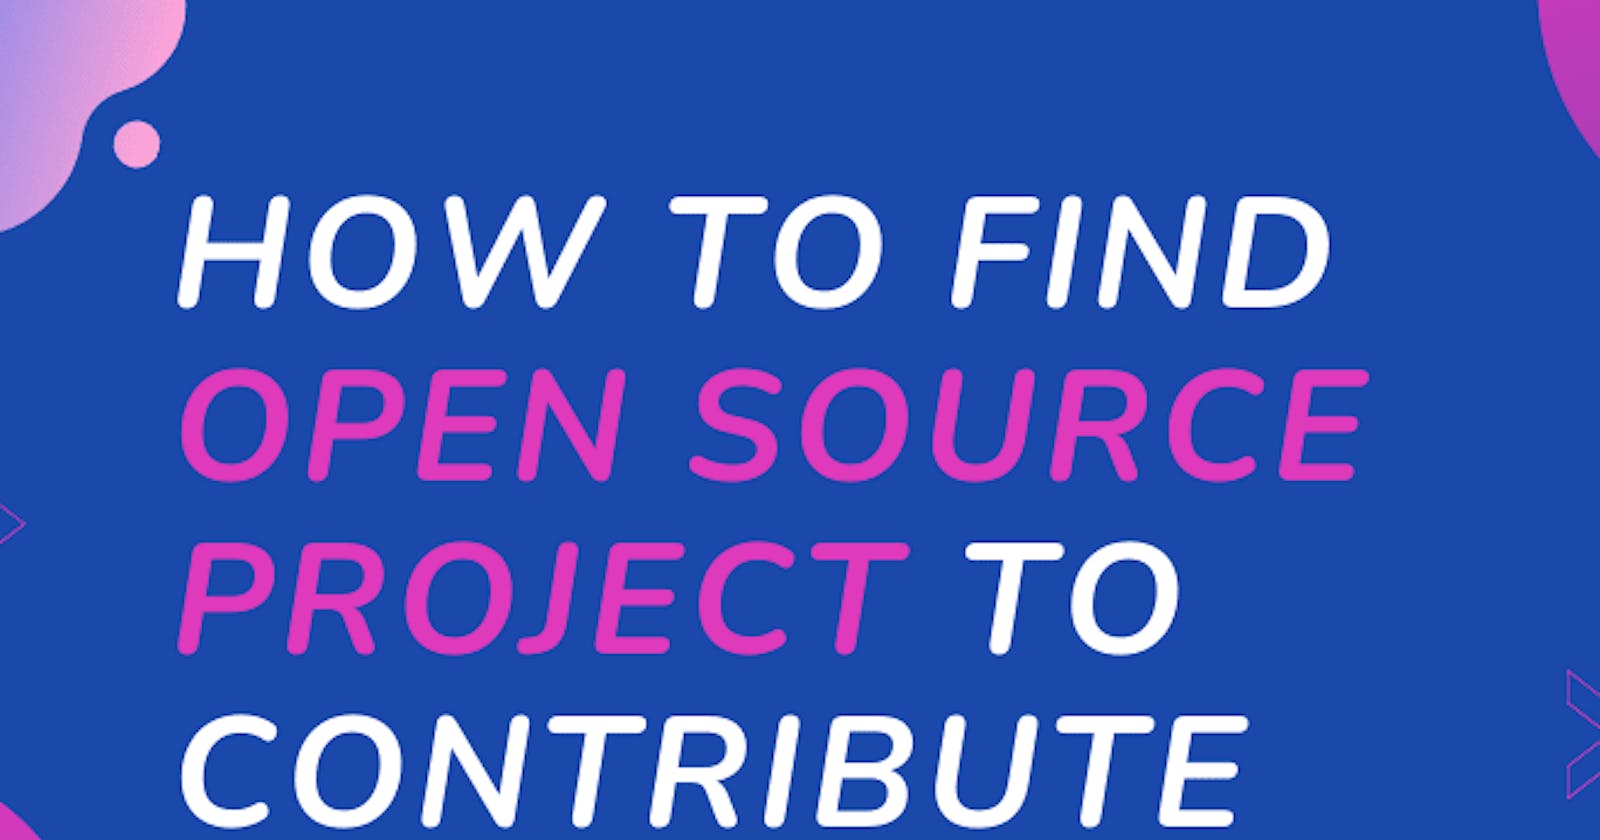 Find Open Source Project to Contribute